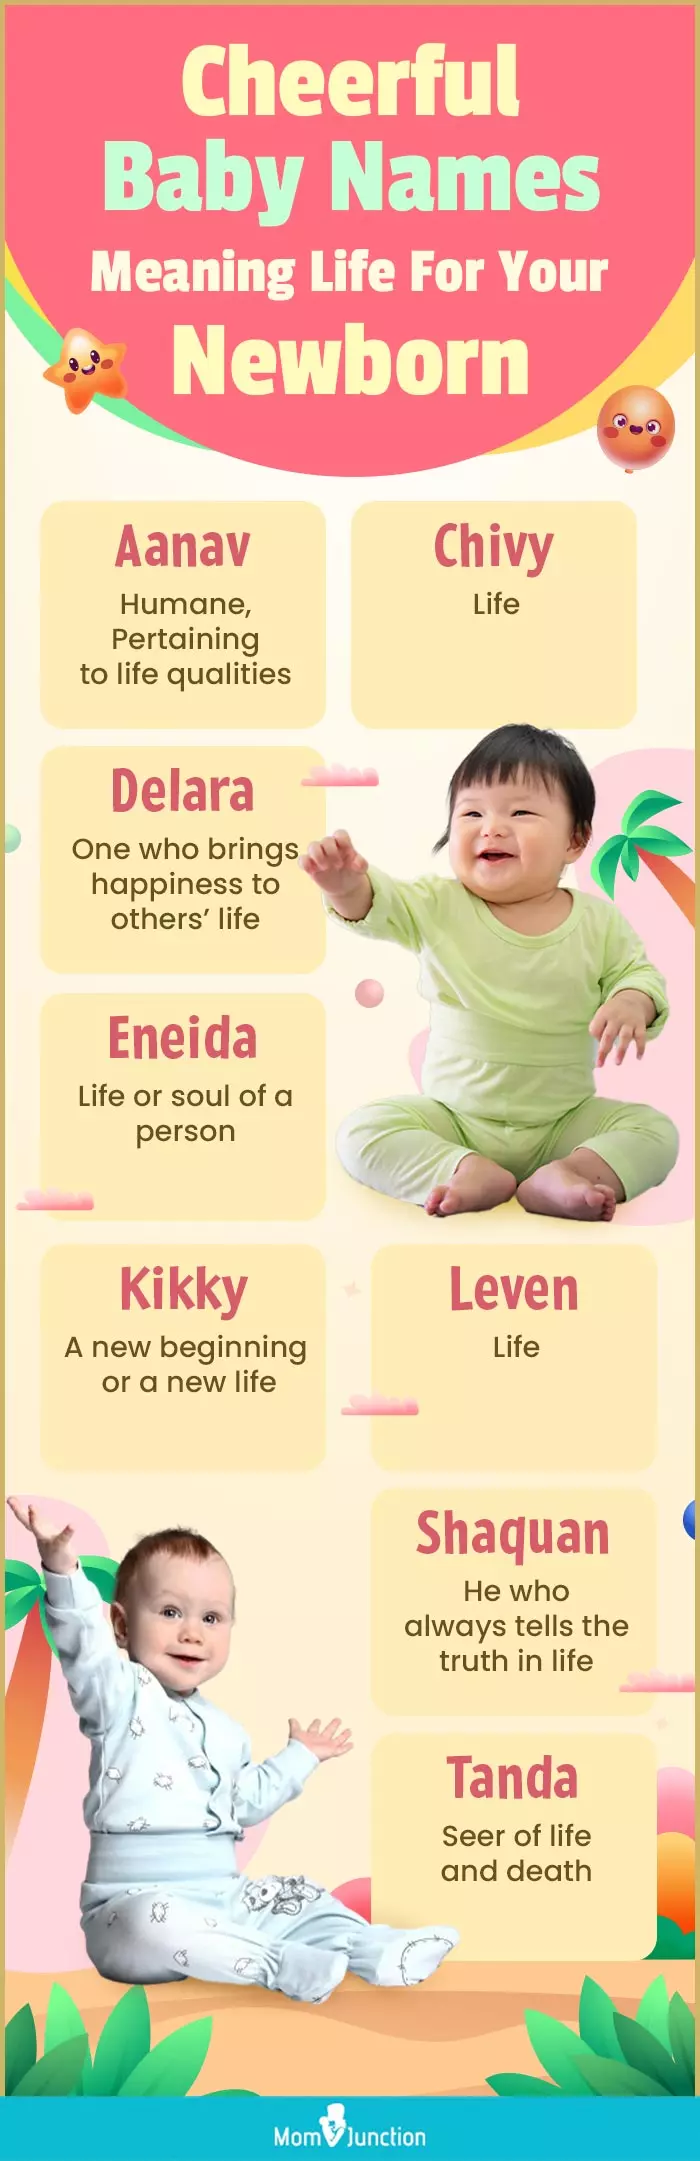 Cheerful Baby Names Meaning Life For Your Newborn (infographic)